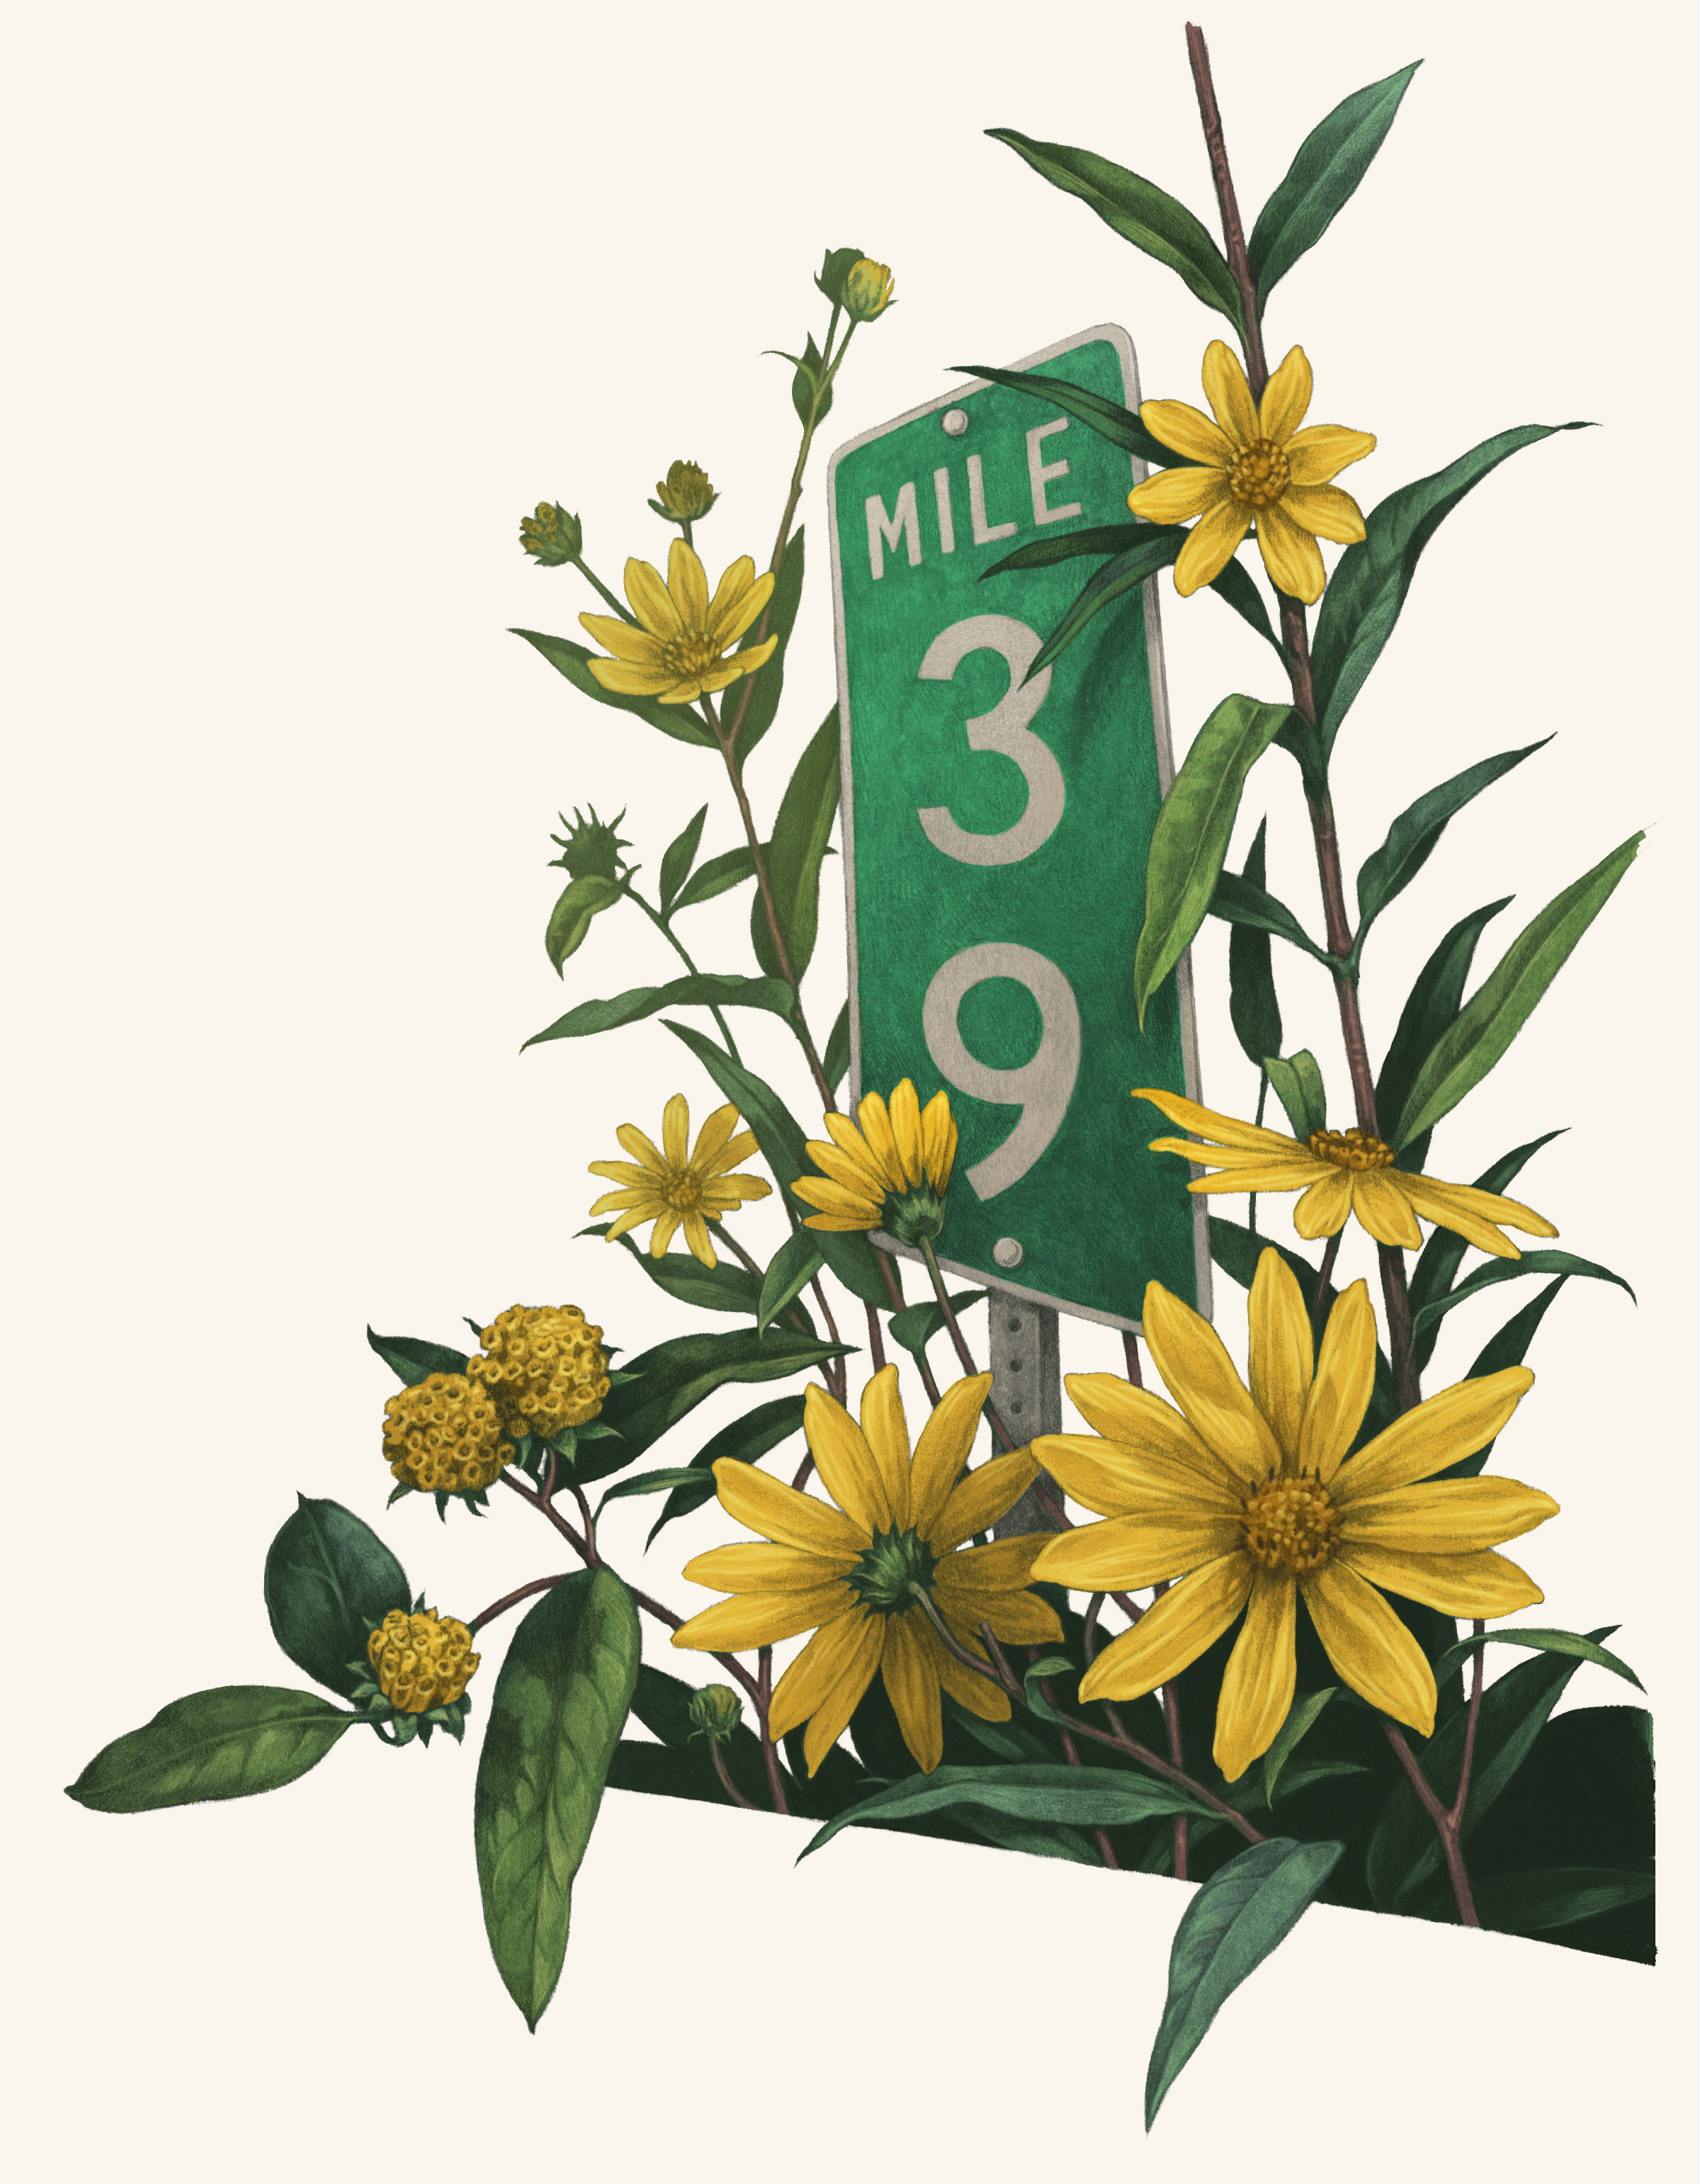 yellow flowers bloom next to a highway mile marker sign.